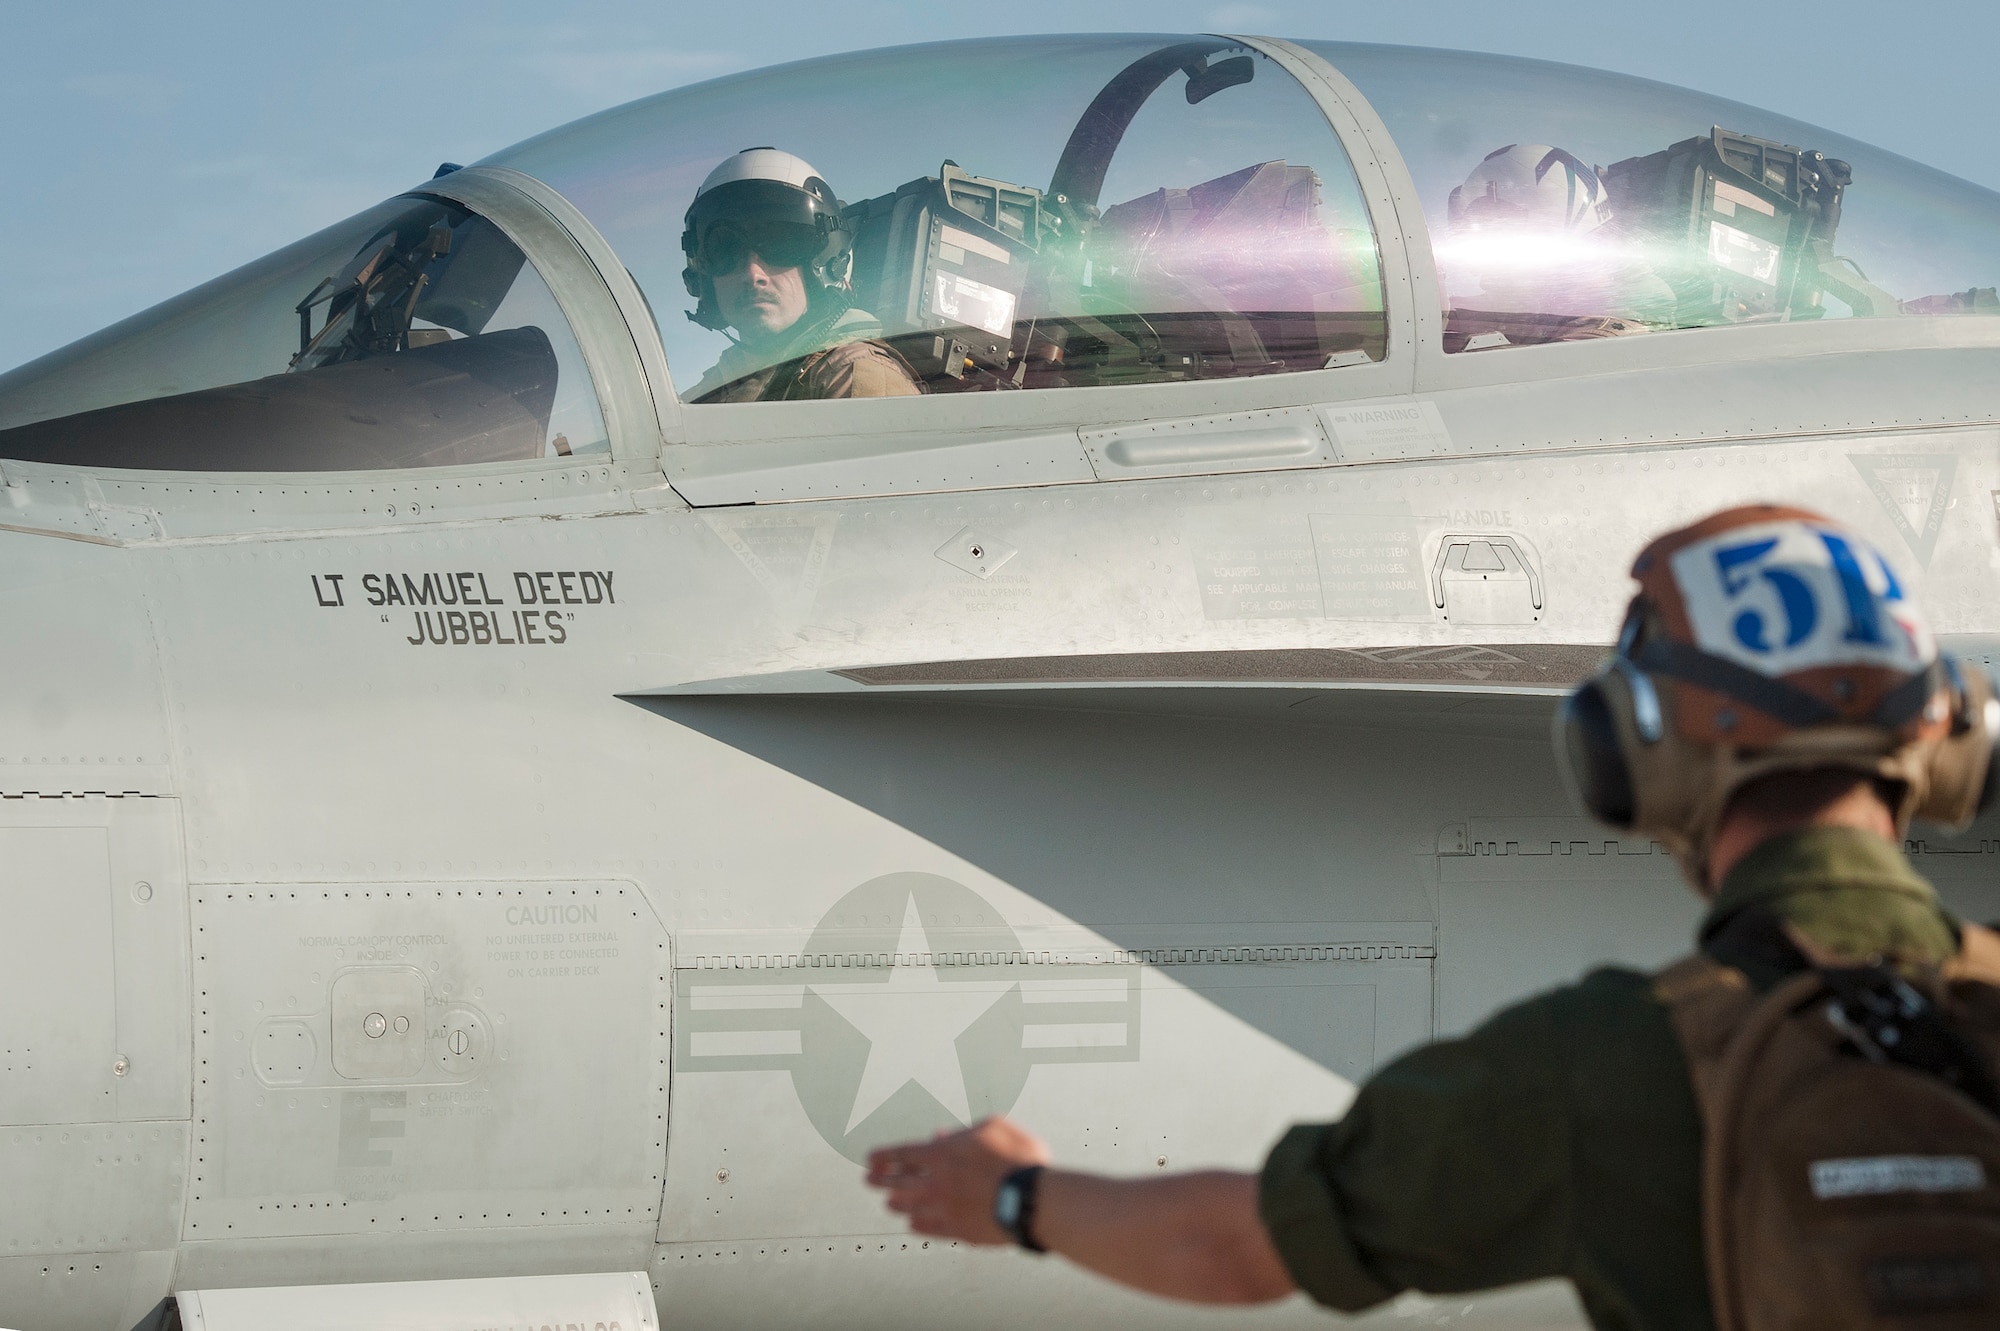 U.S. Air Force 1st Lt. Jonathan Wright, 390th Electronic Combat Squadron and Electronic Attack Squadron 135 (VAQ-135) “Black Ravens” EA-18G Growler pilot, completes his first combat flight Nov. 19, 2018, at Al Udeid Air Base, Qatar. Wright is the first Air Force pilot to operate a Growler on a combat mission. VAQ-135 is deployed to the U.S. 5th Fleet area of operations in support of naval operations to ensure maritime stability and security in the Central Region, connecting the Mediterranean and the Pacific through the western Indian Ocean and three strategic choke points. (U.S. Air Force photo by Tech. Sgt. Christopher Hubenthal)